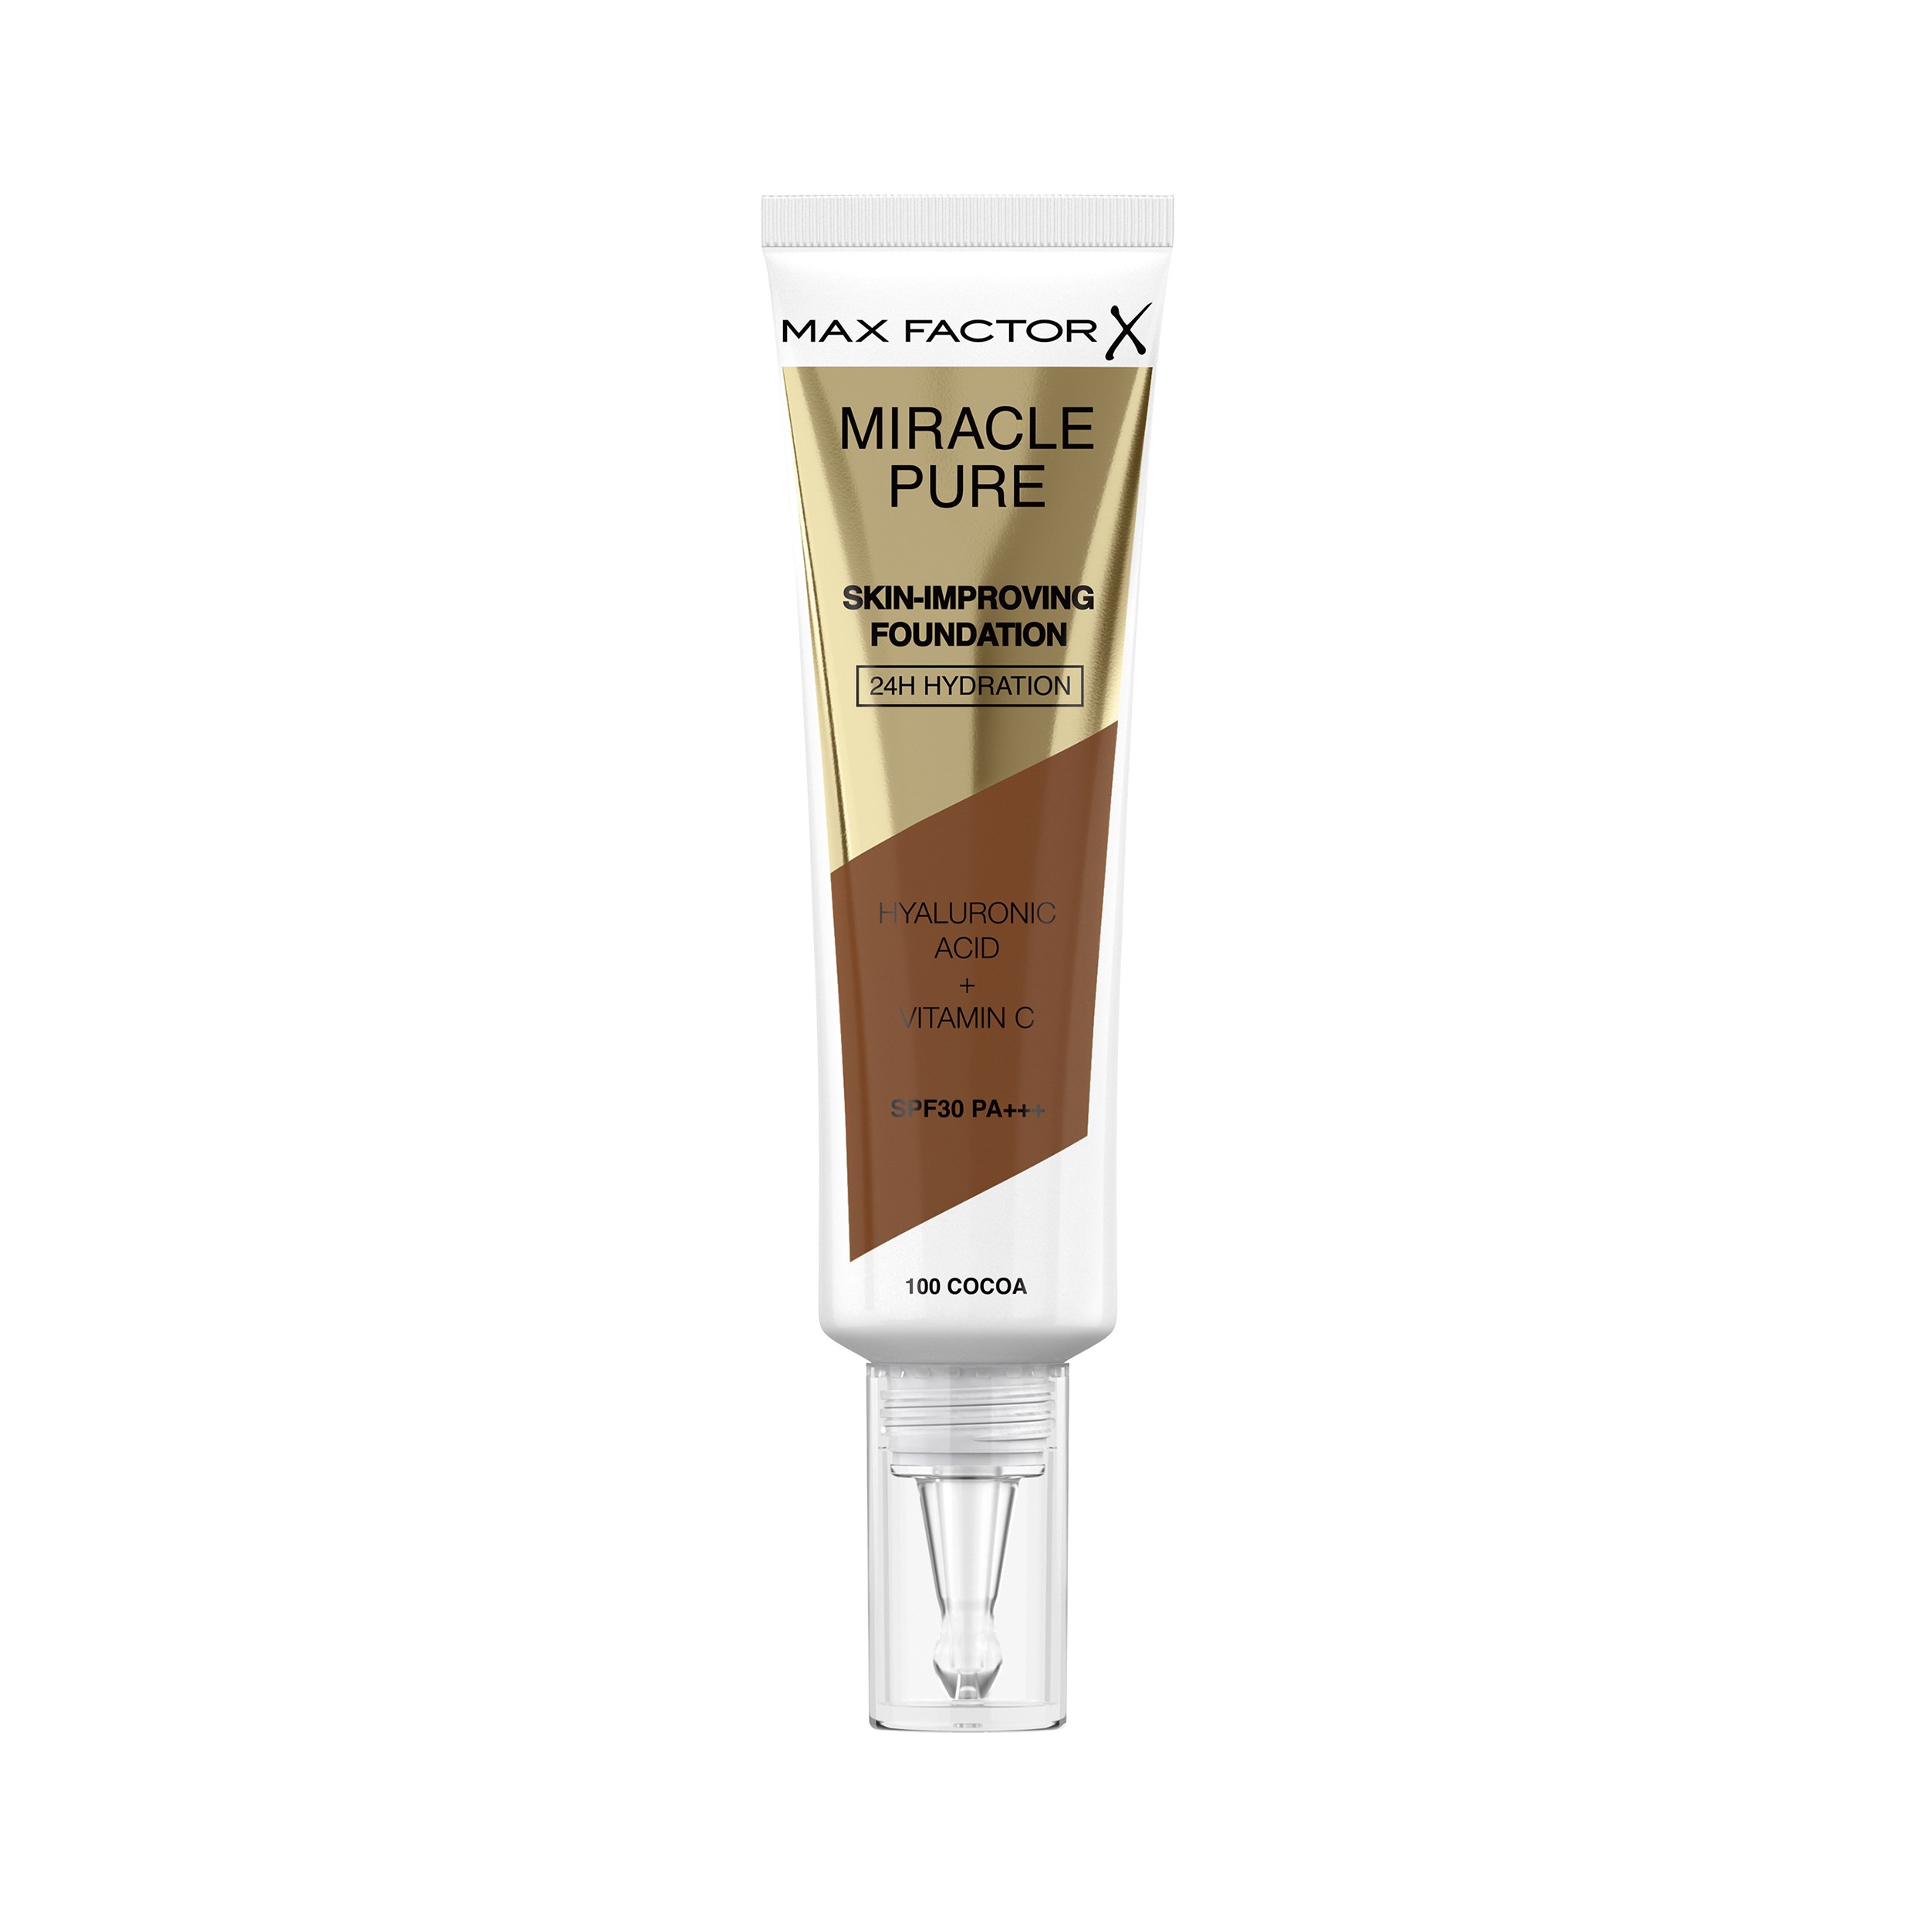 Läs mer om Max Factor Miracle Pure Skin-Improving Foundation 100 Cocoa